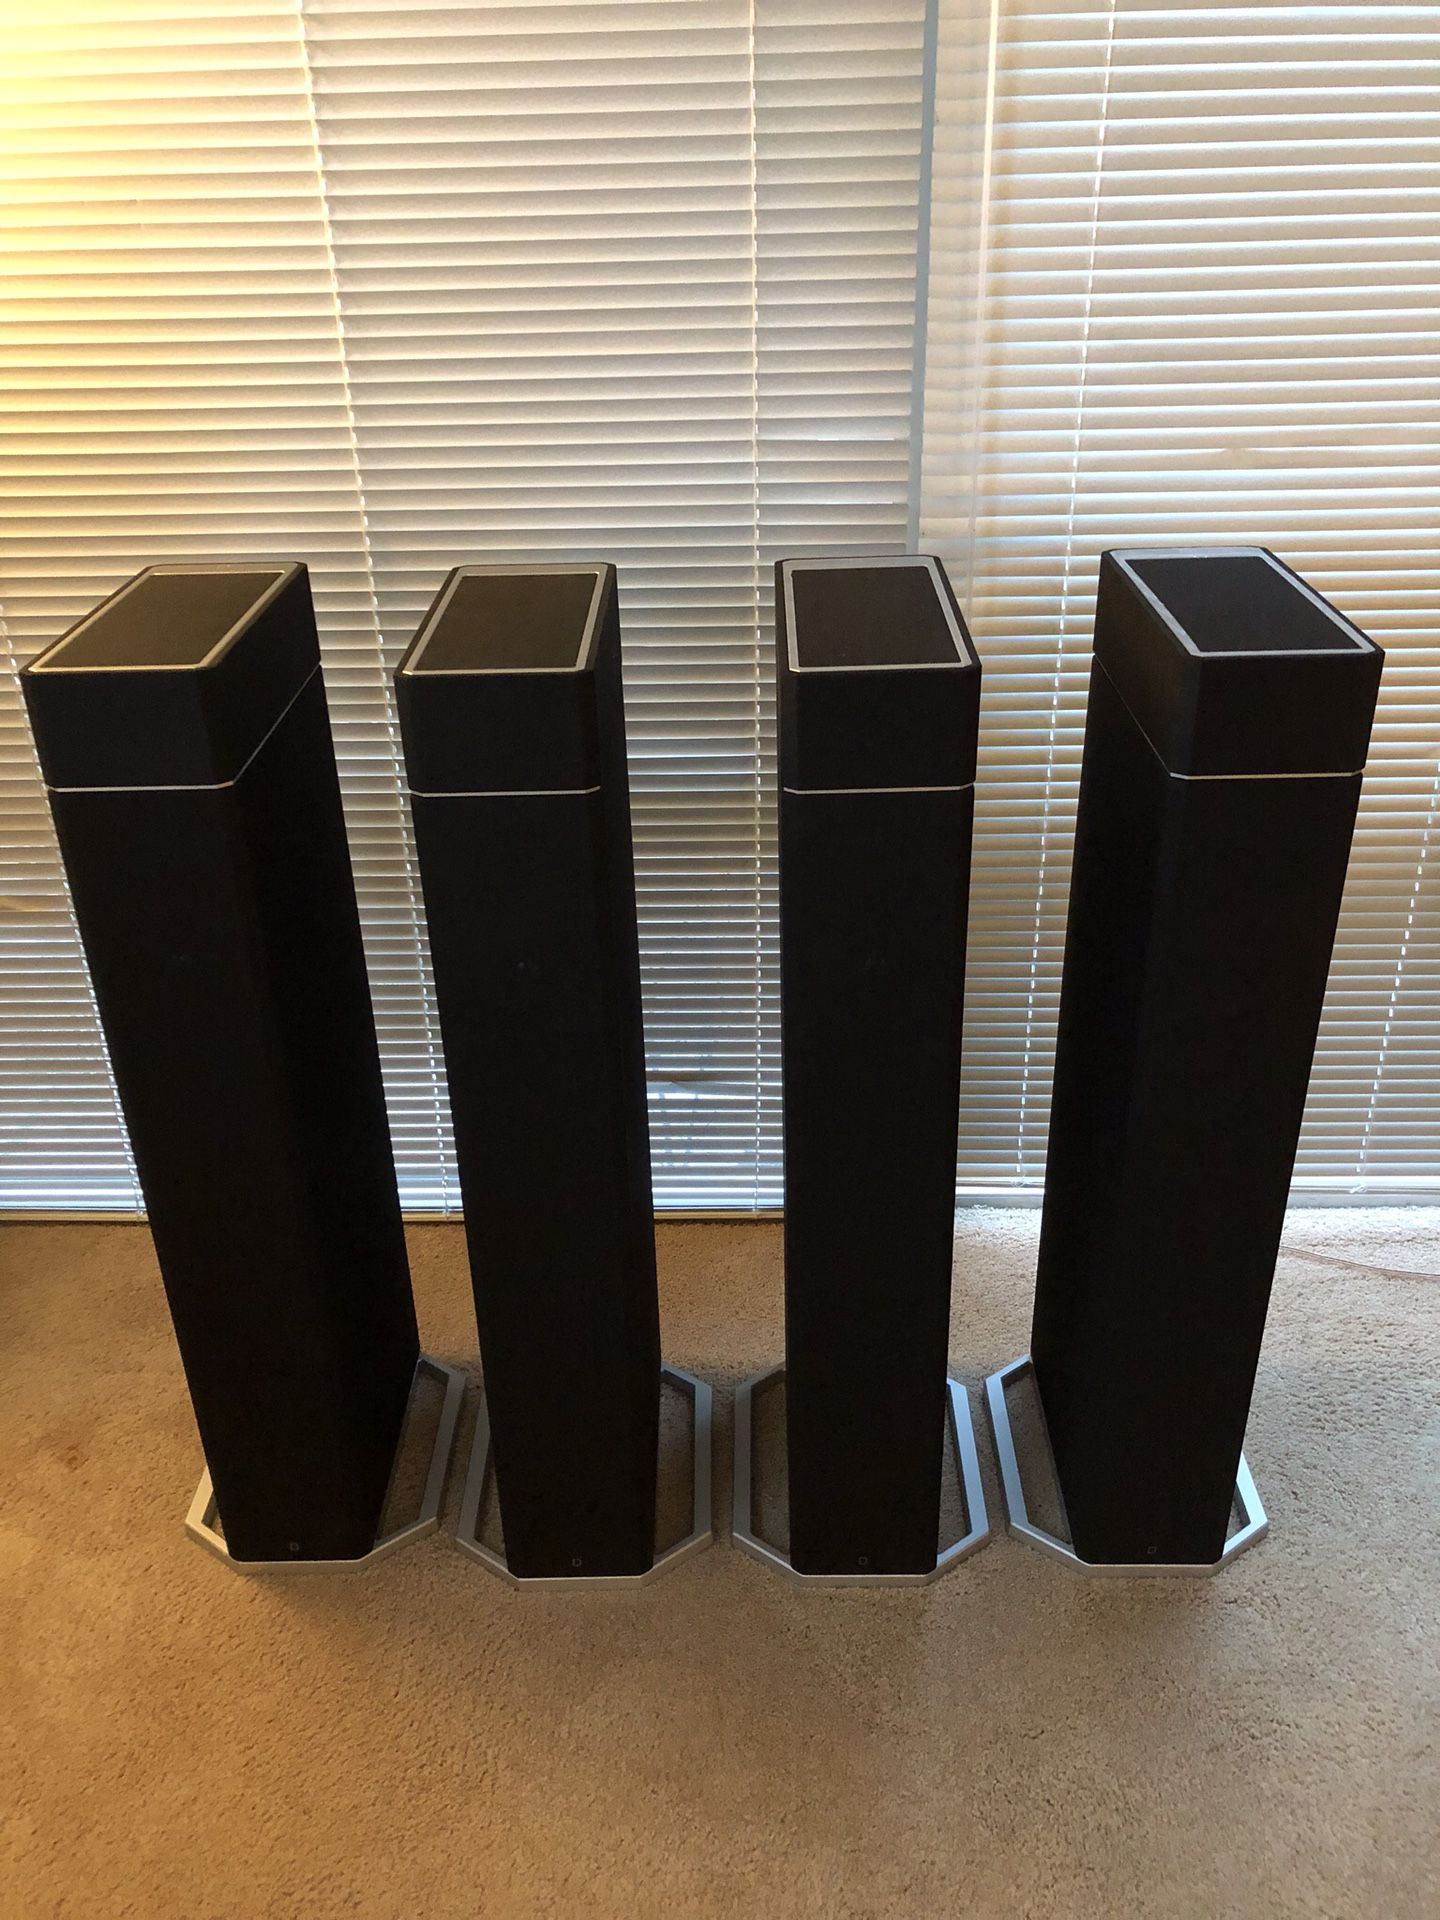 Four Definitive Technology BP9020 home theater speakers with A90 Dolby Atmos tops.